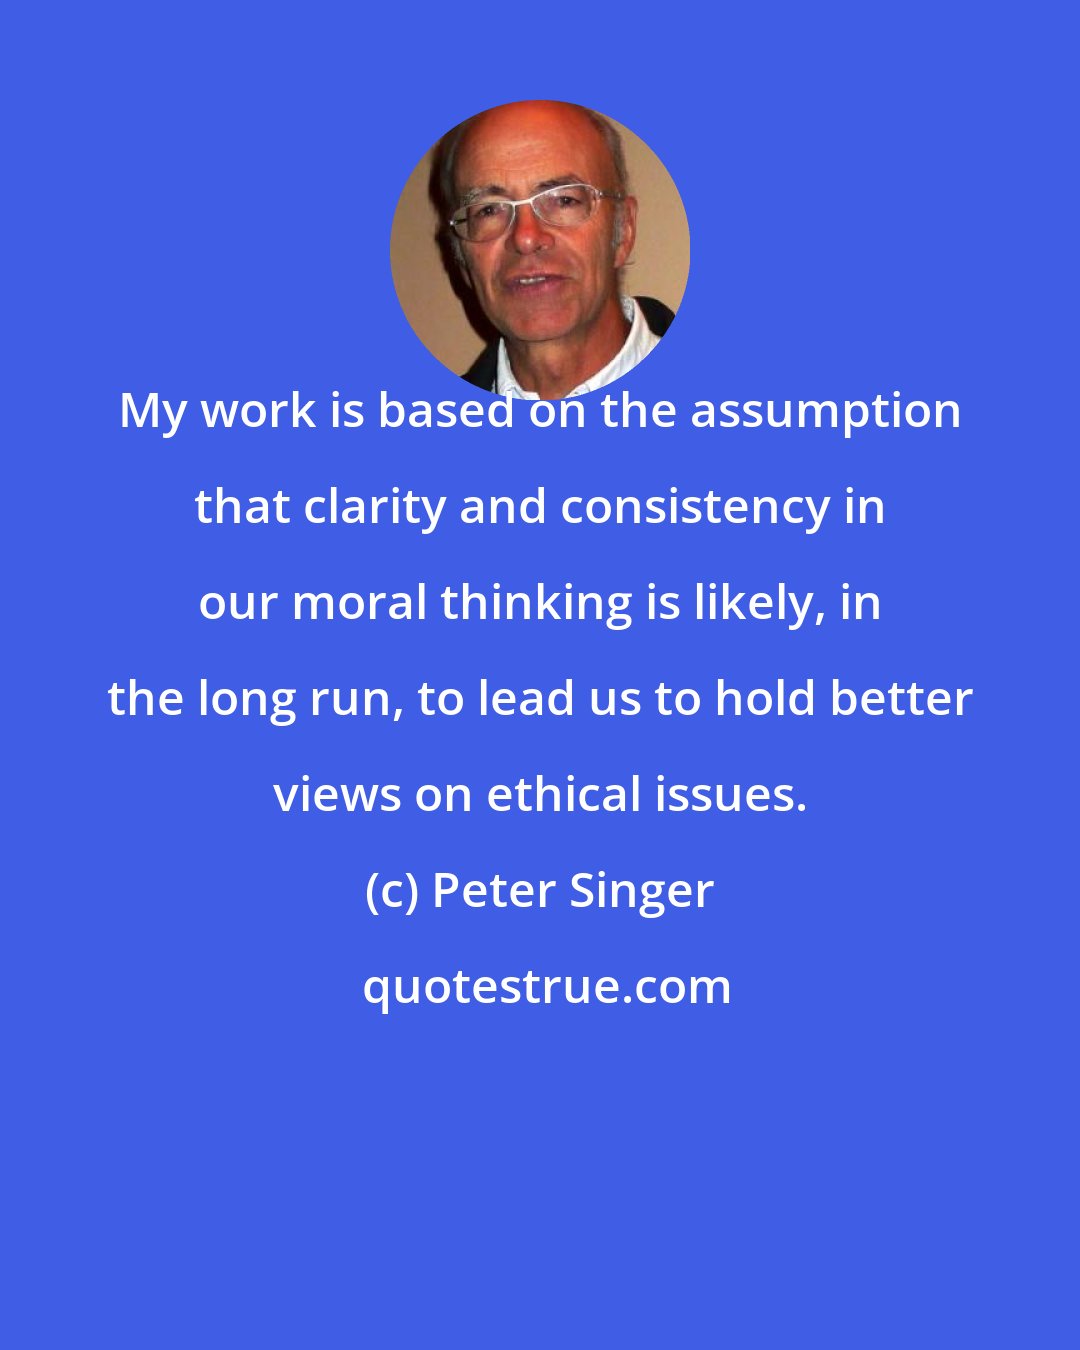 Peter Singer: My work is based on the assumption that clarity and consistency in our moral thinking is likely, in the long run, to lead us to hold better views on ethical issues.